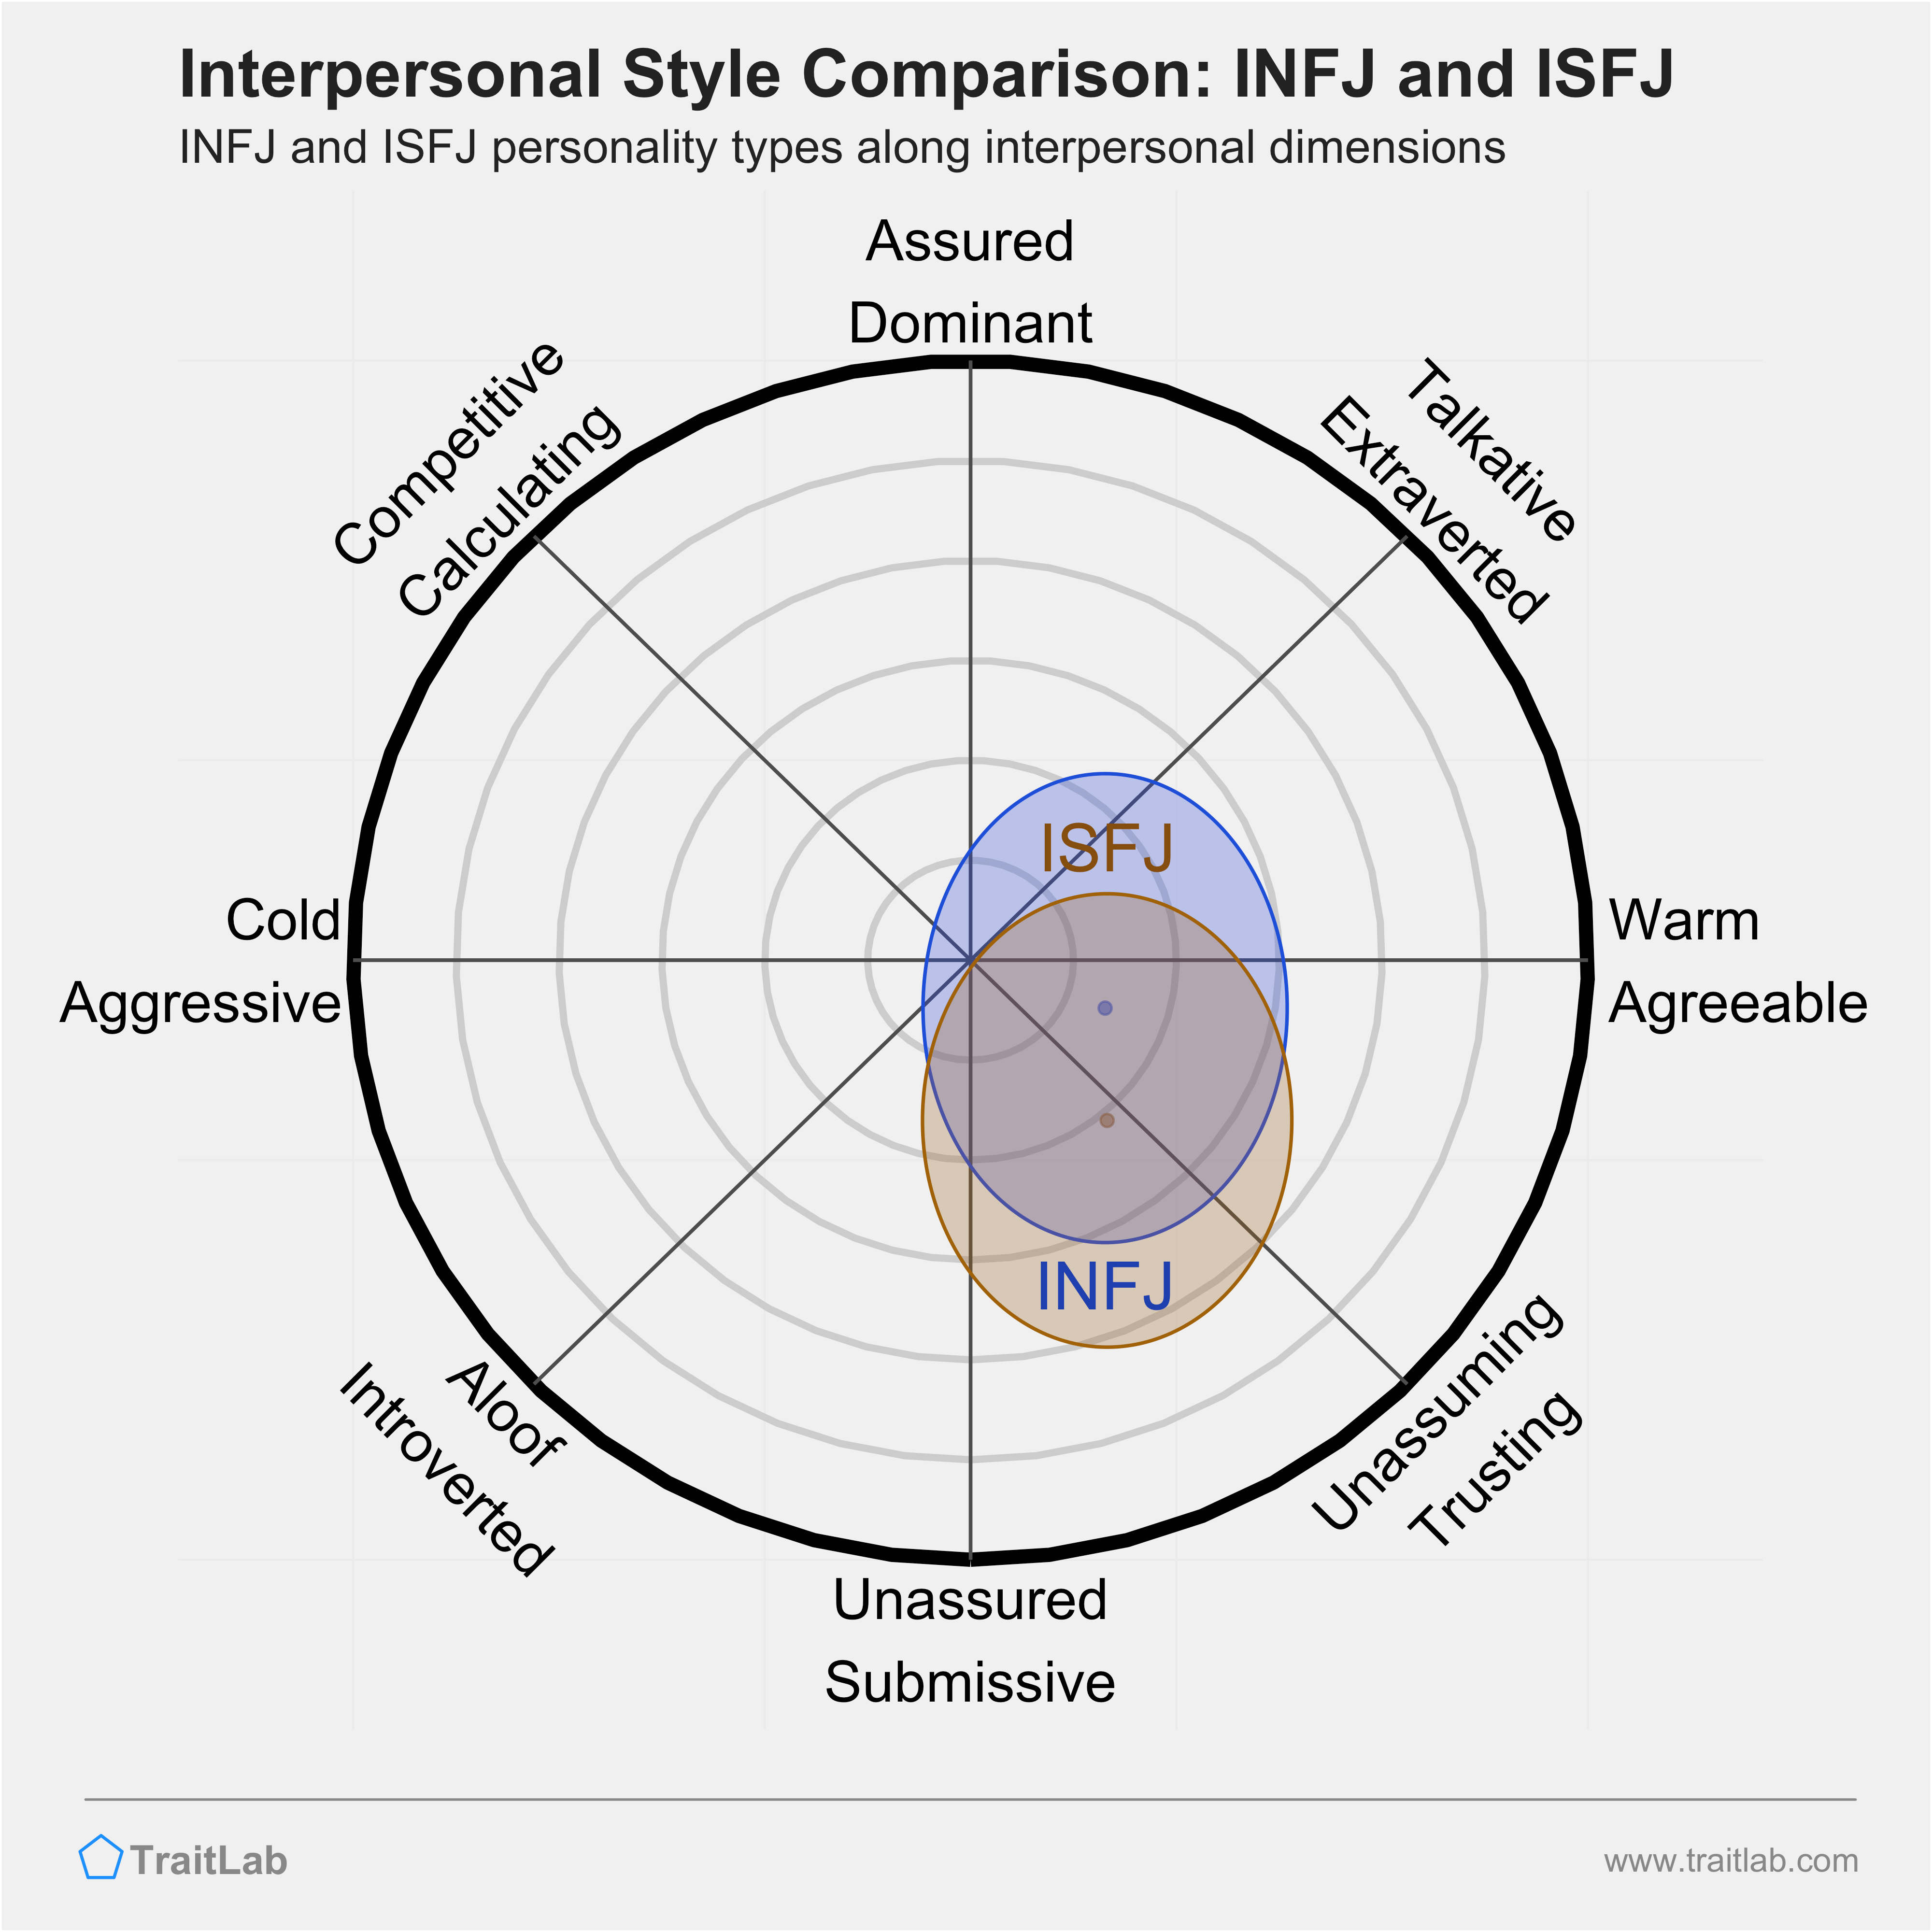 INFJ and ISFJ comparison across interpersonal dimensions